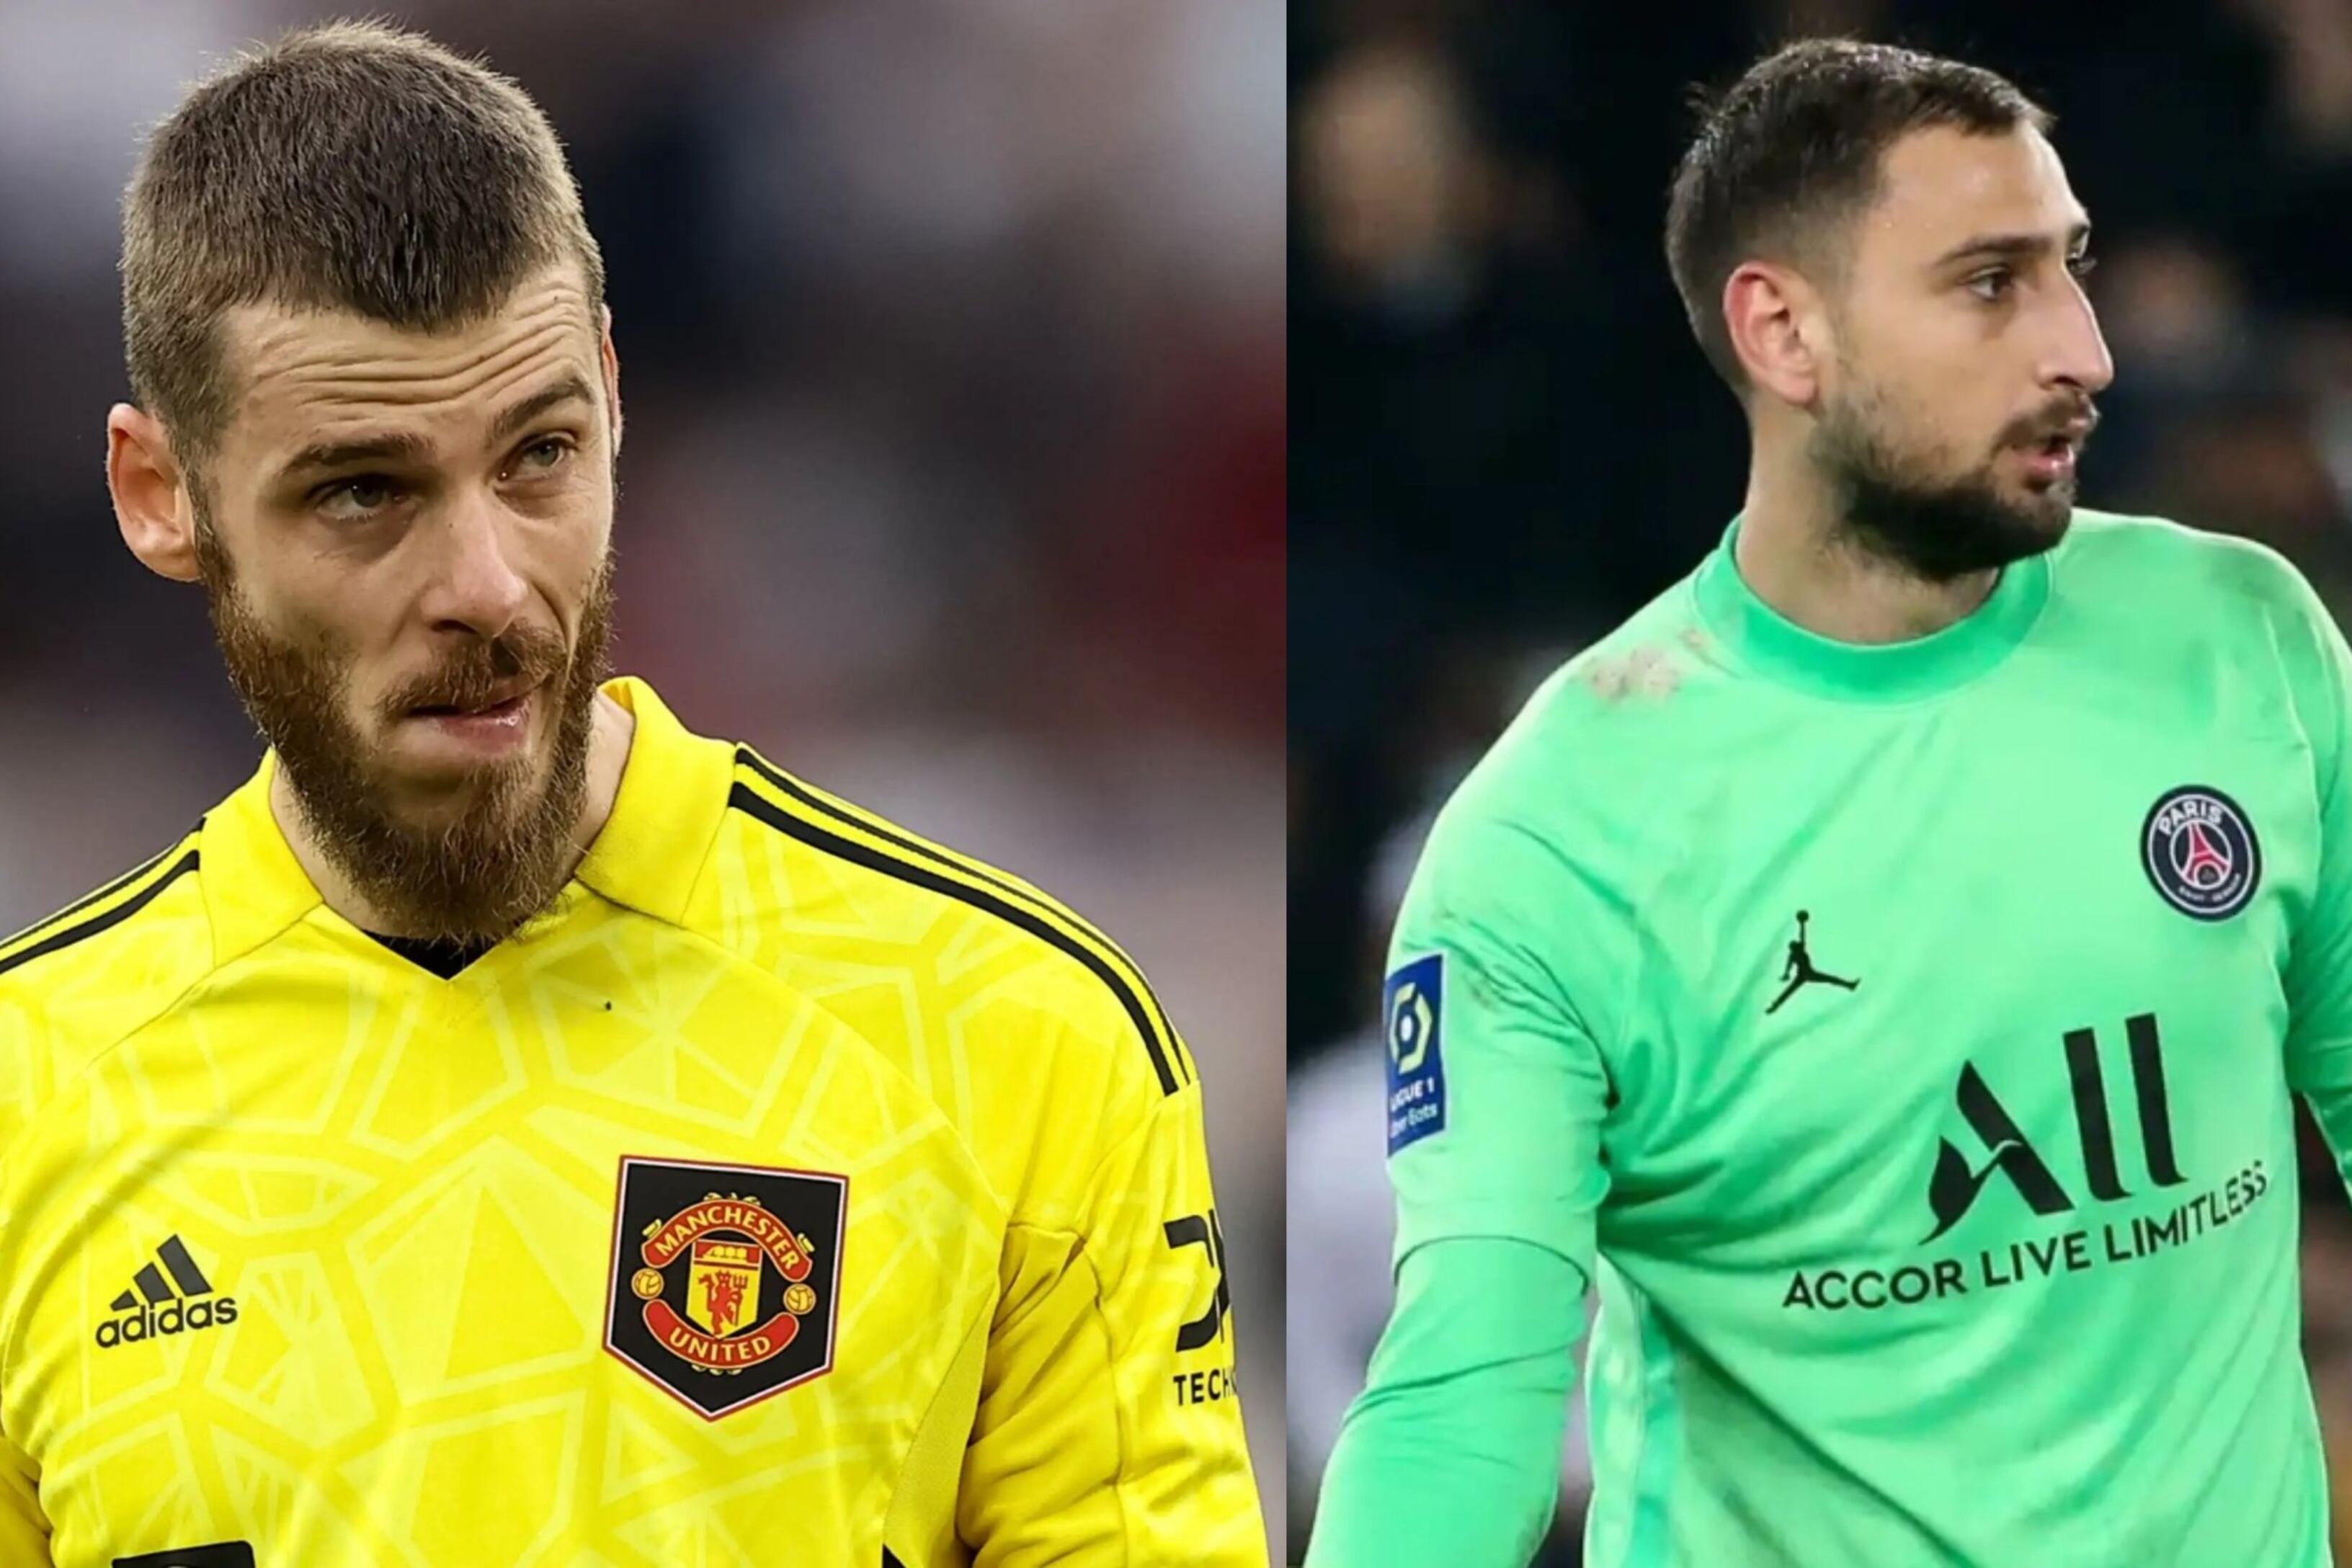 David De Gea earned 20 million at Man United, what PSG would pay him to replace Donnarumma